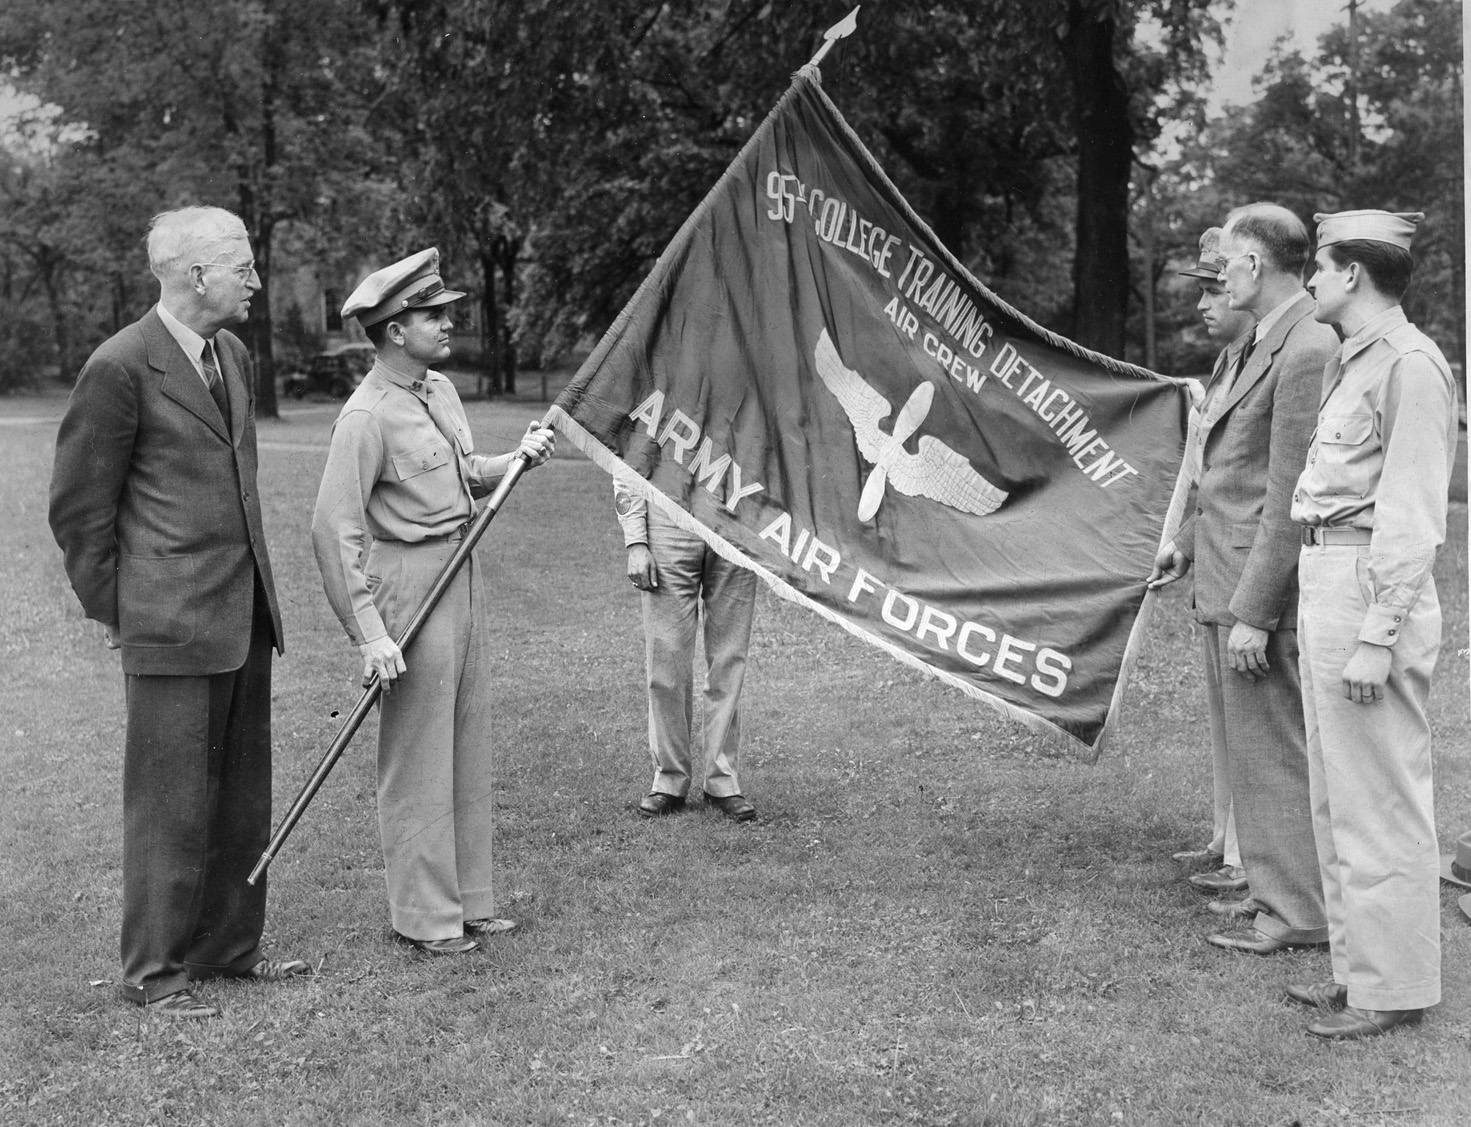 Captain Charles R. Manning, commanding the 95th CTD at Beloit, holds the flag for staff members and school administrators to admire. Beloit College was one of 150 schools nationwide that hosted the Army Air Force (AAF) Aviation Cadet Training Program.